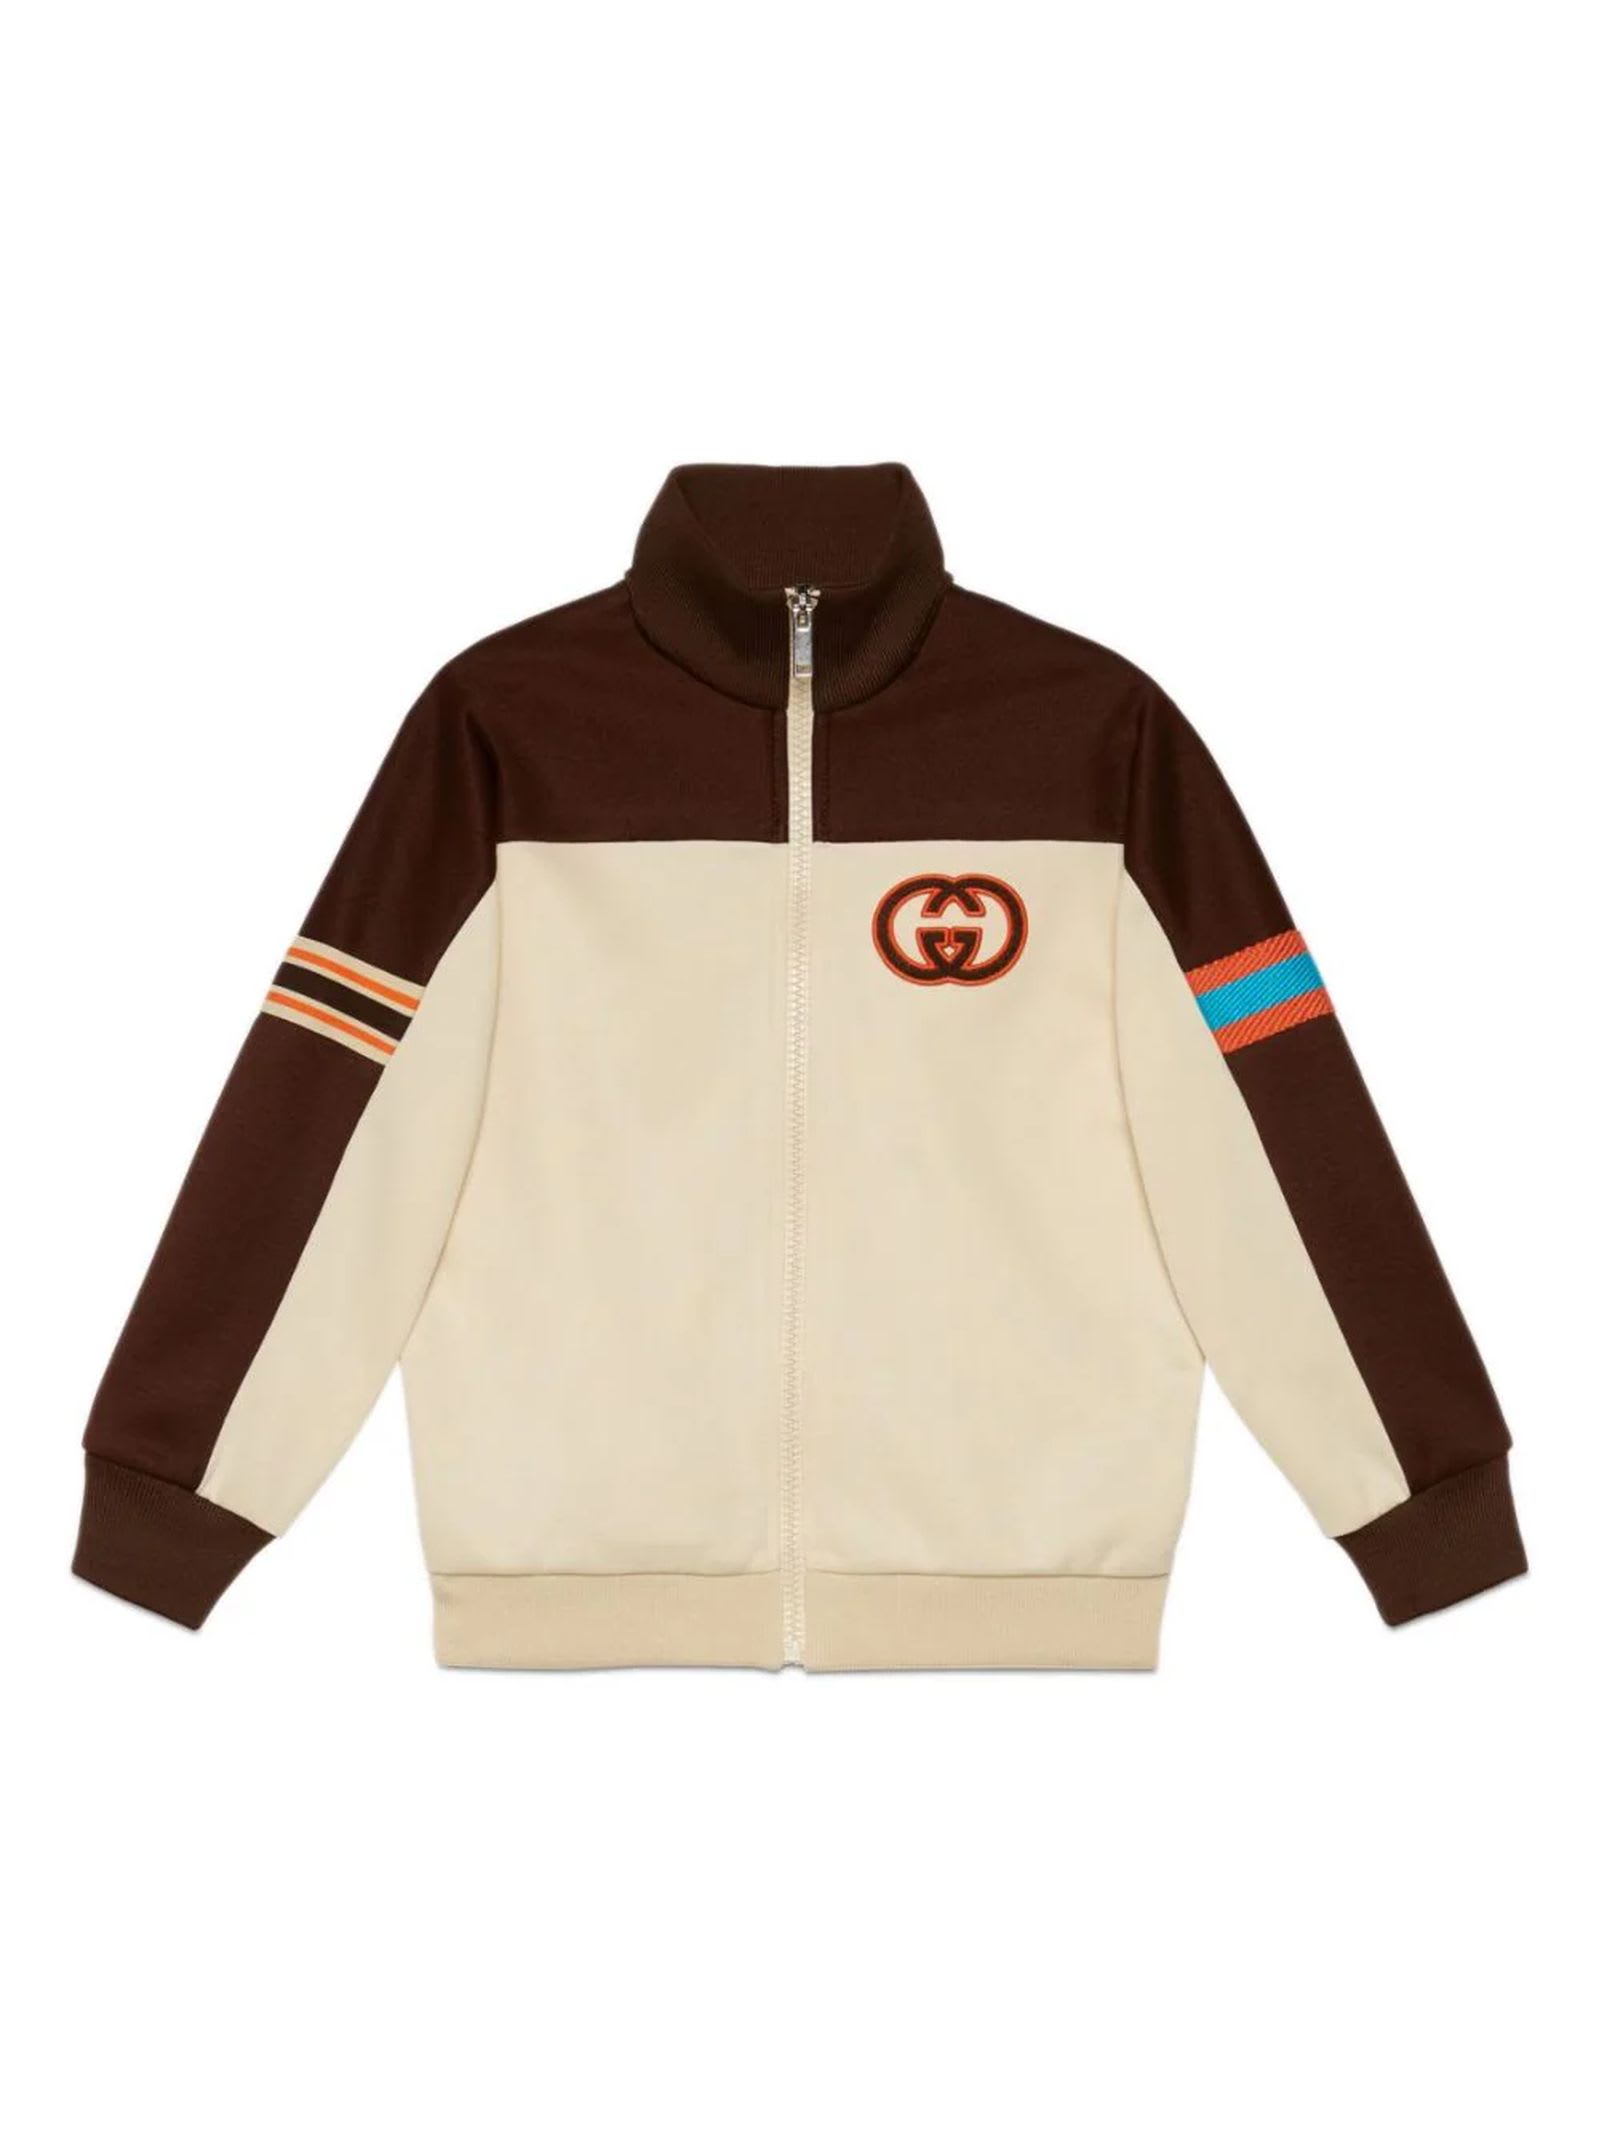 GUCCI CHOCOLATE BROWN COTTON JACKET